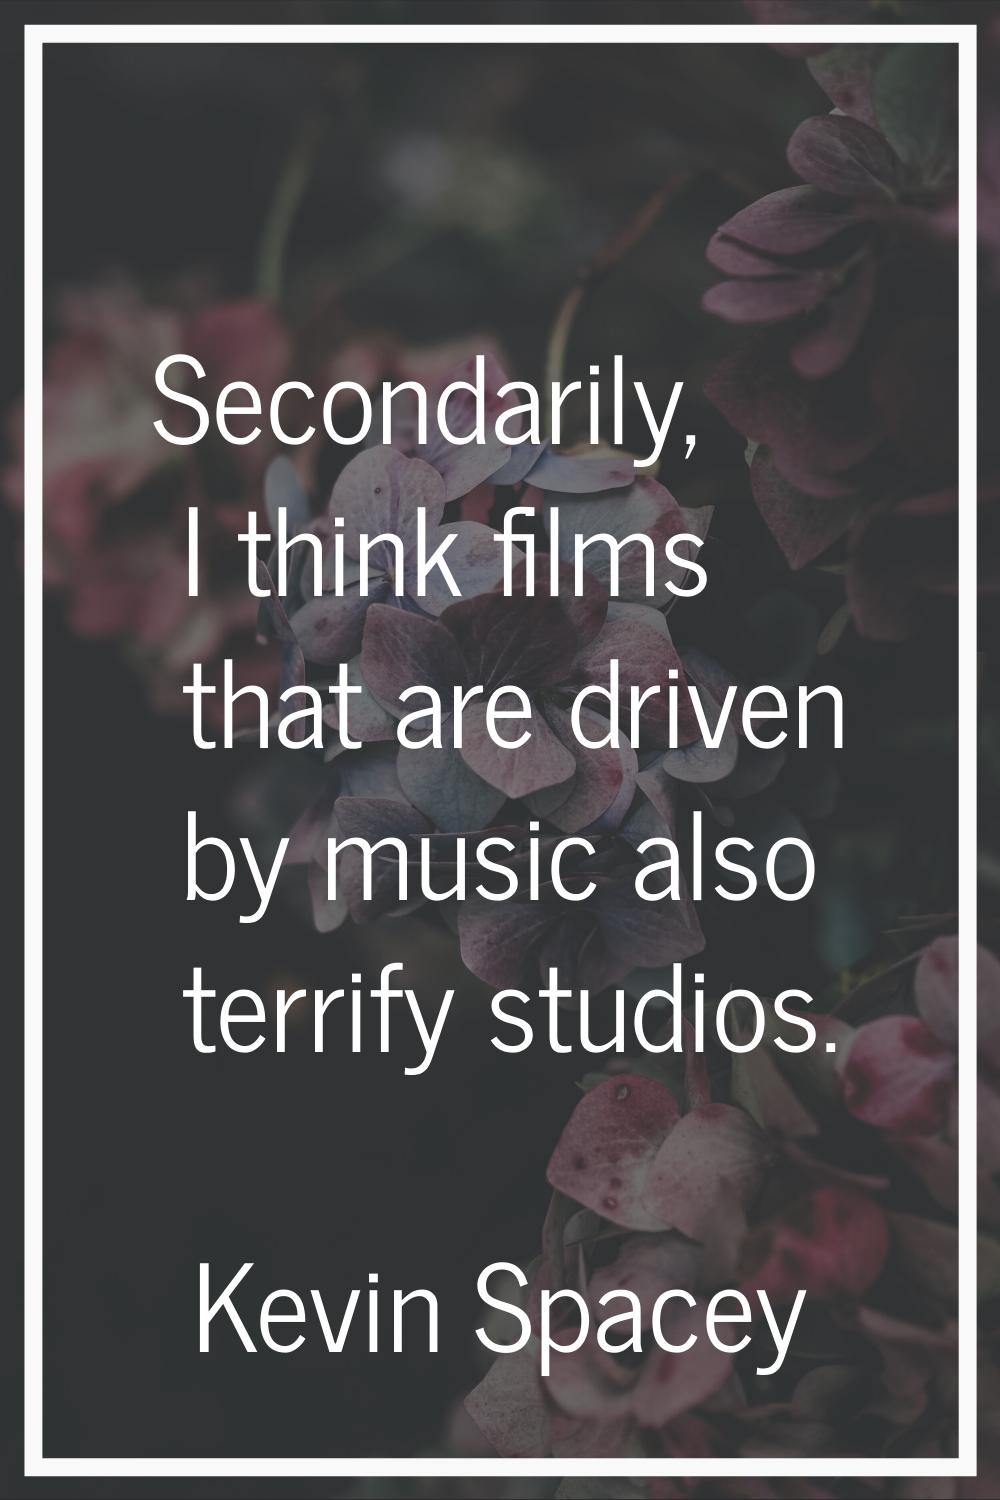 Secondarily, I think films that are driven by music also terrify studios.